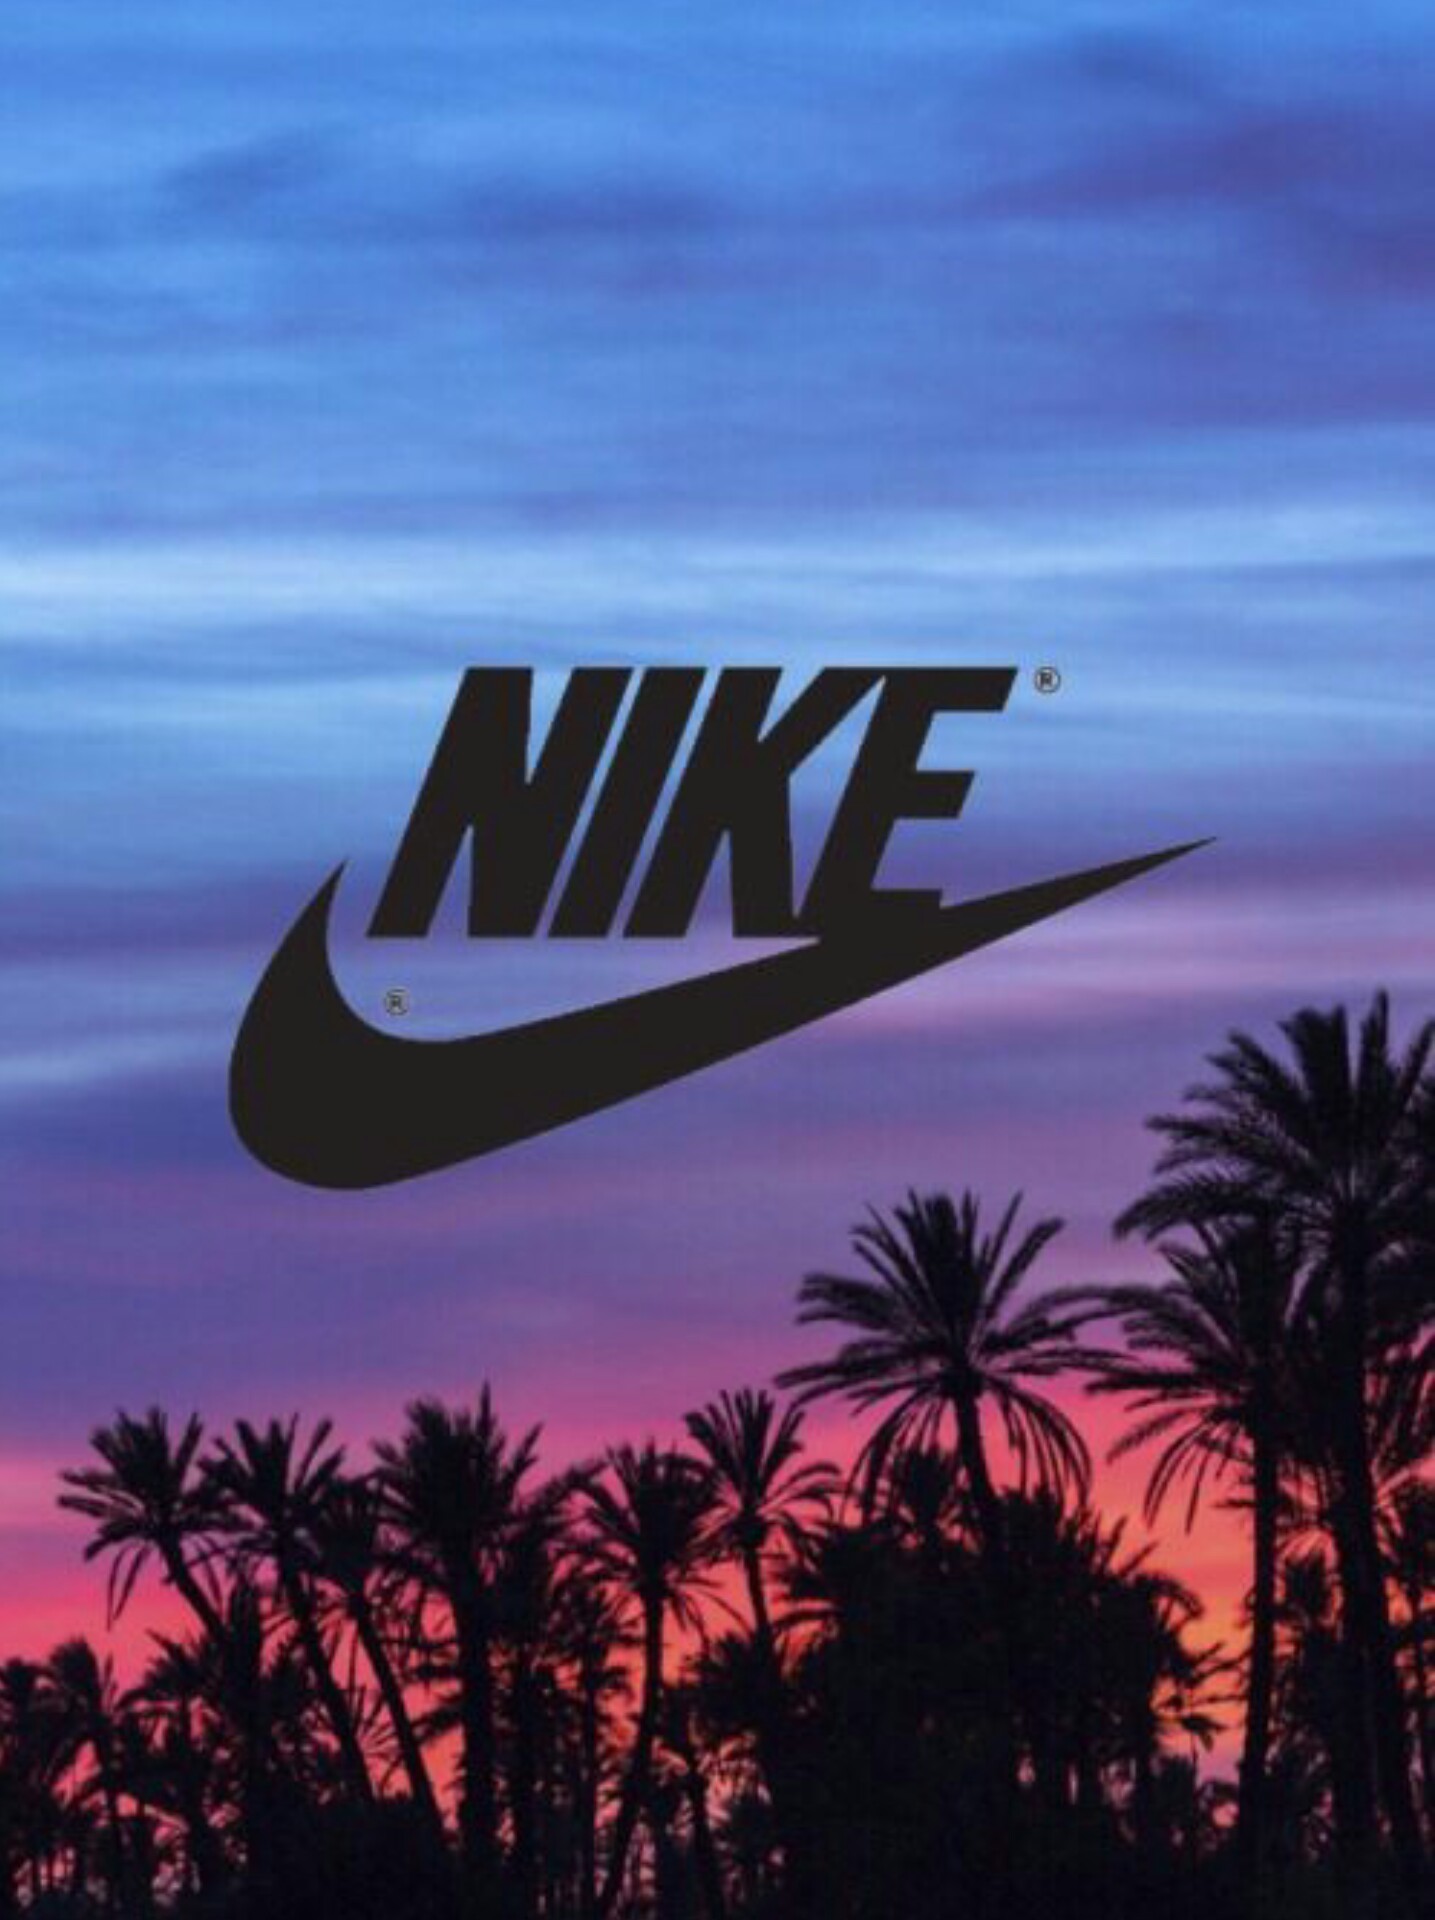 1435x1920 Nike Wallpaper, Most Beautiful Images, Image Search